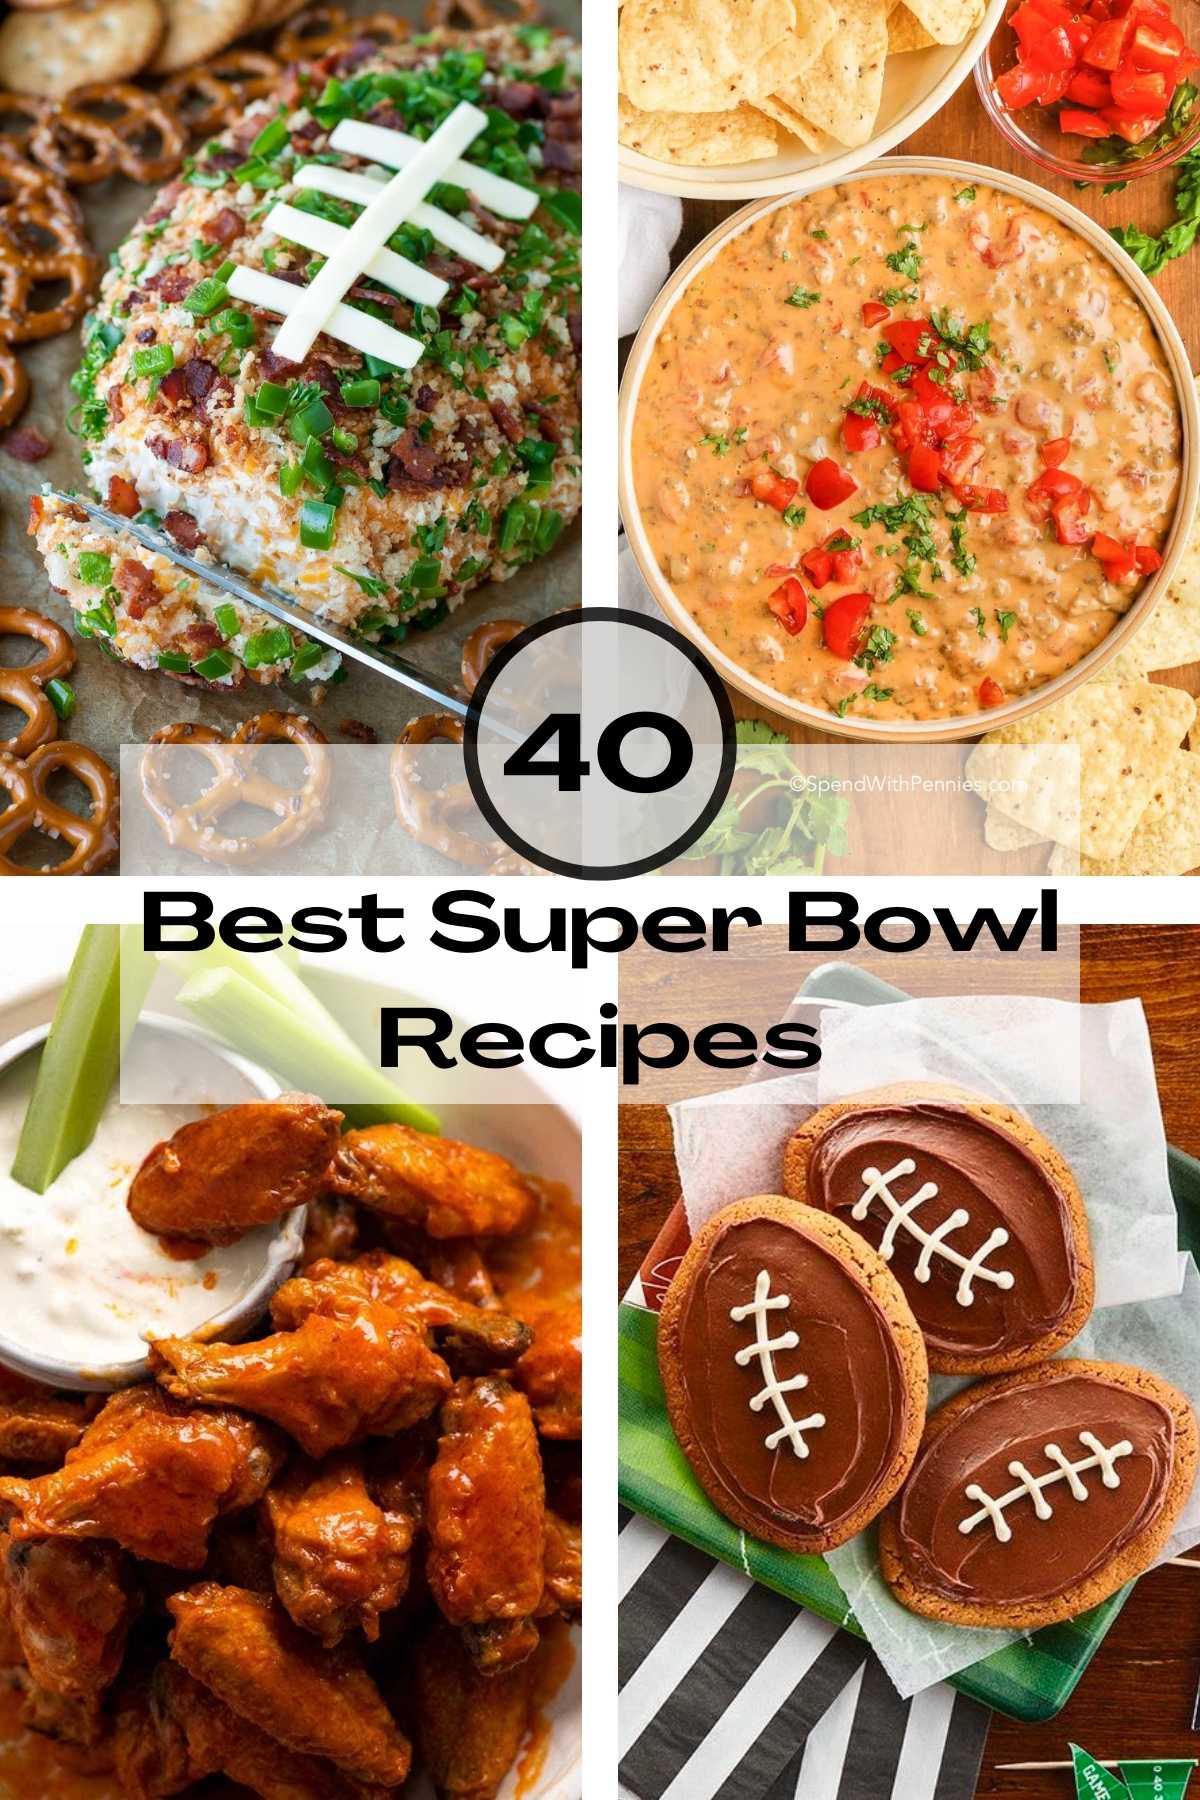 Best Super Bowl recipes with hot wings, cheese ball, Rotel dip and football cookies.